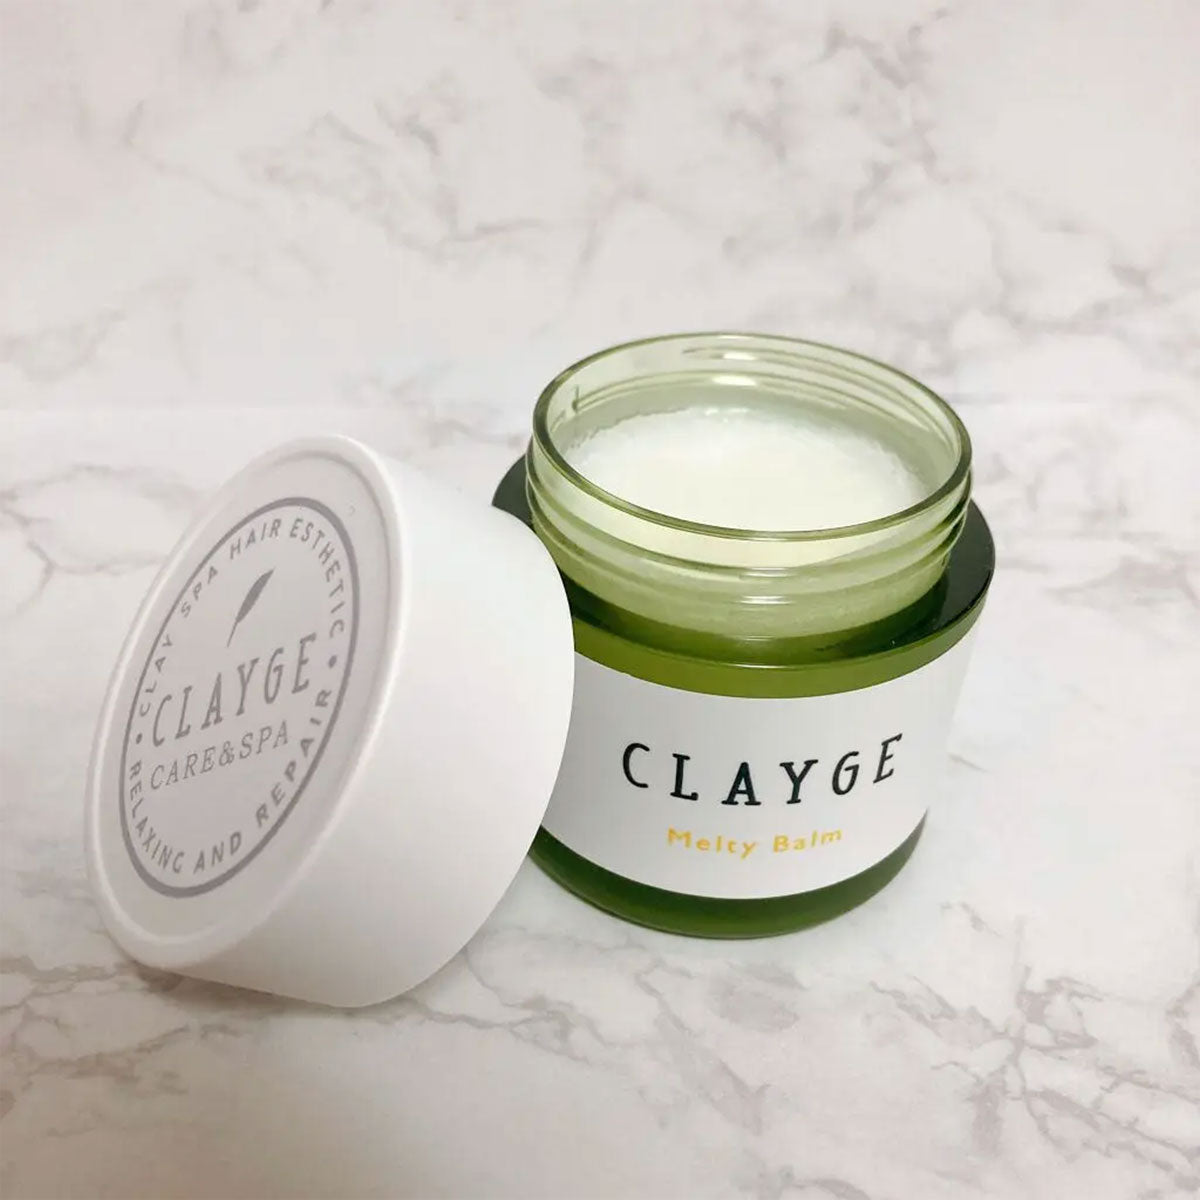 Clayge Melty Balm 40g